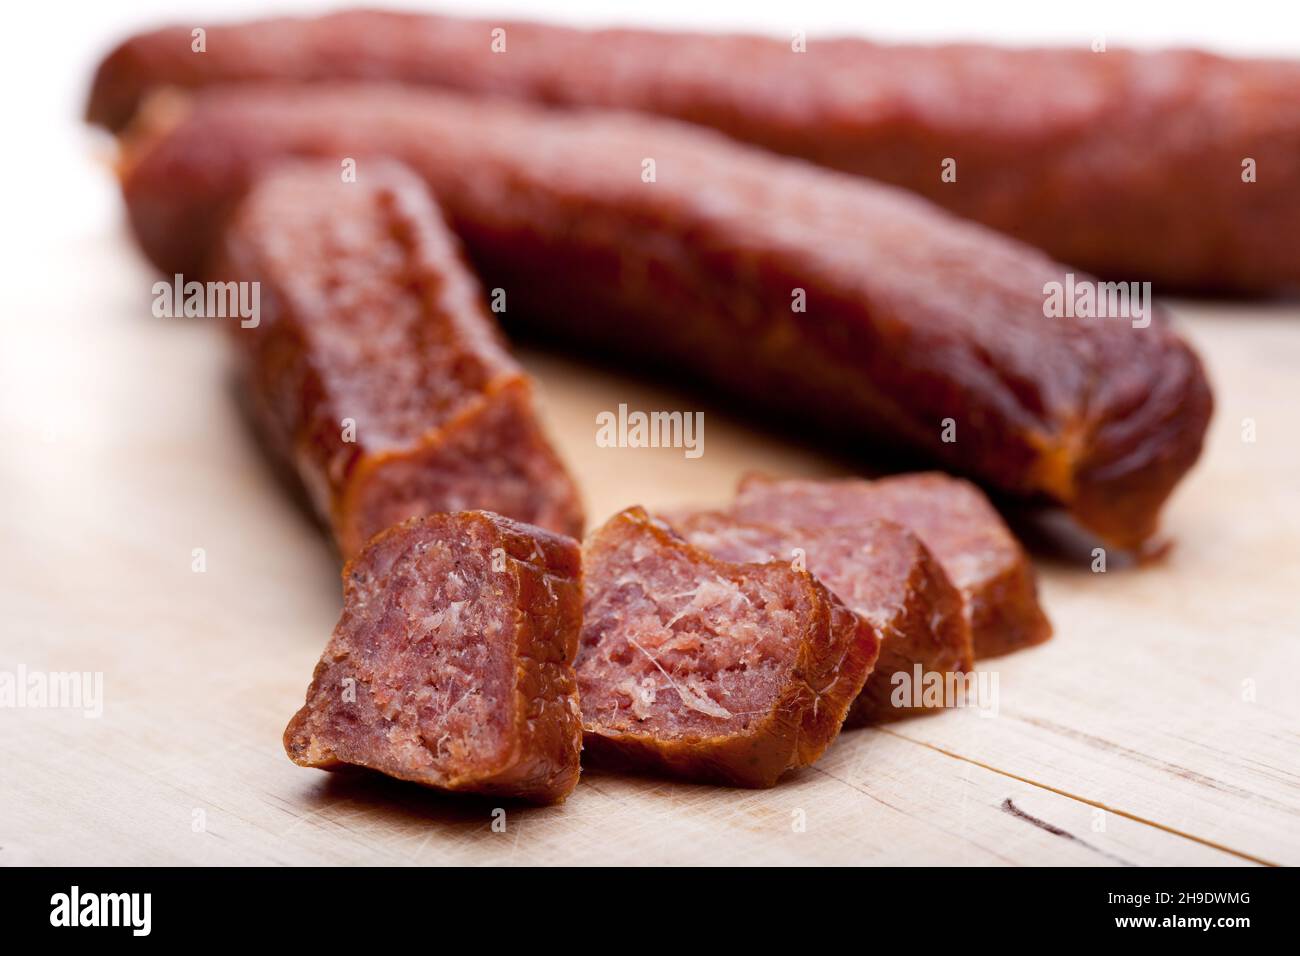 smoked sausages, sausages, wooden board, fat, close, sausage, smoked,  Austria, board, dried, multiple, brown, background, white, detail, wood,  studio Stock Photo - Alamy